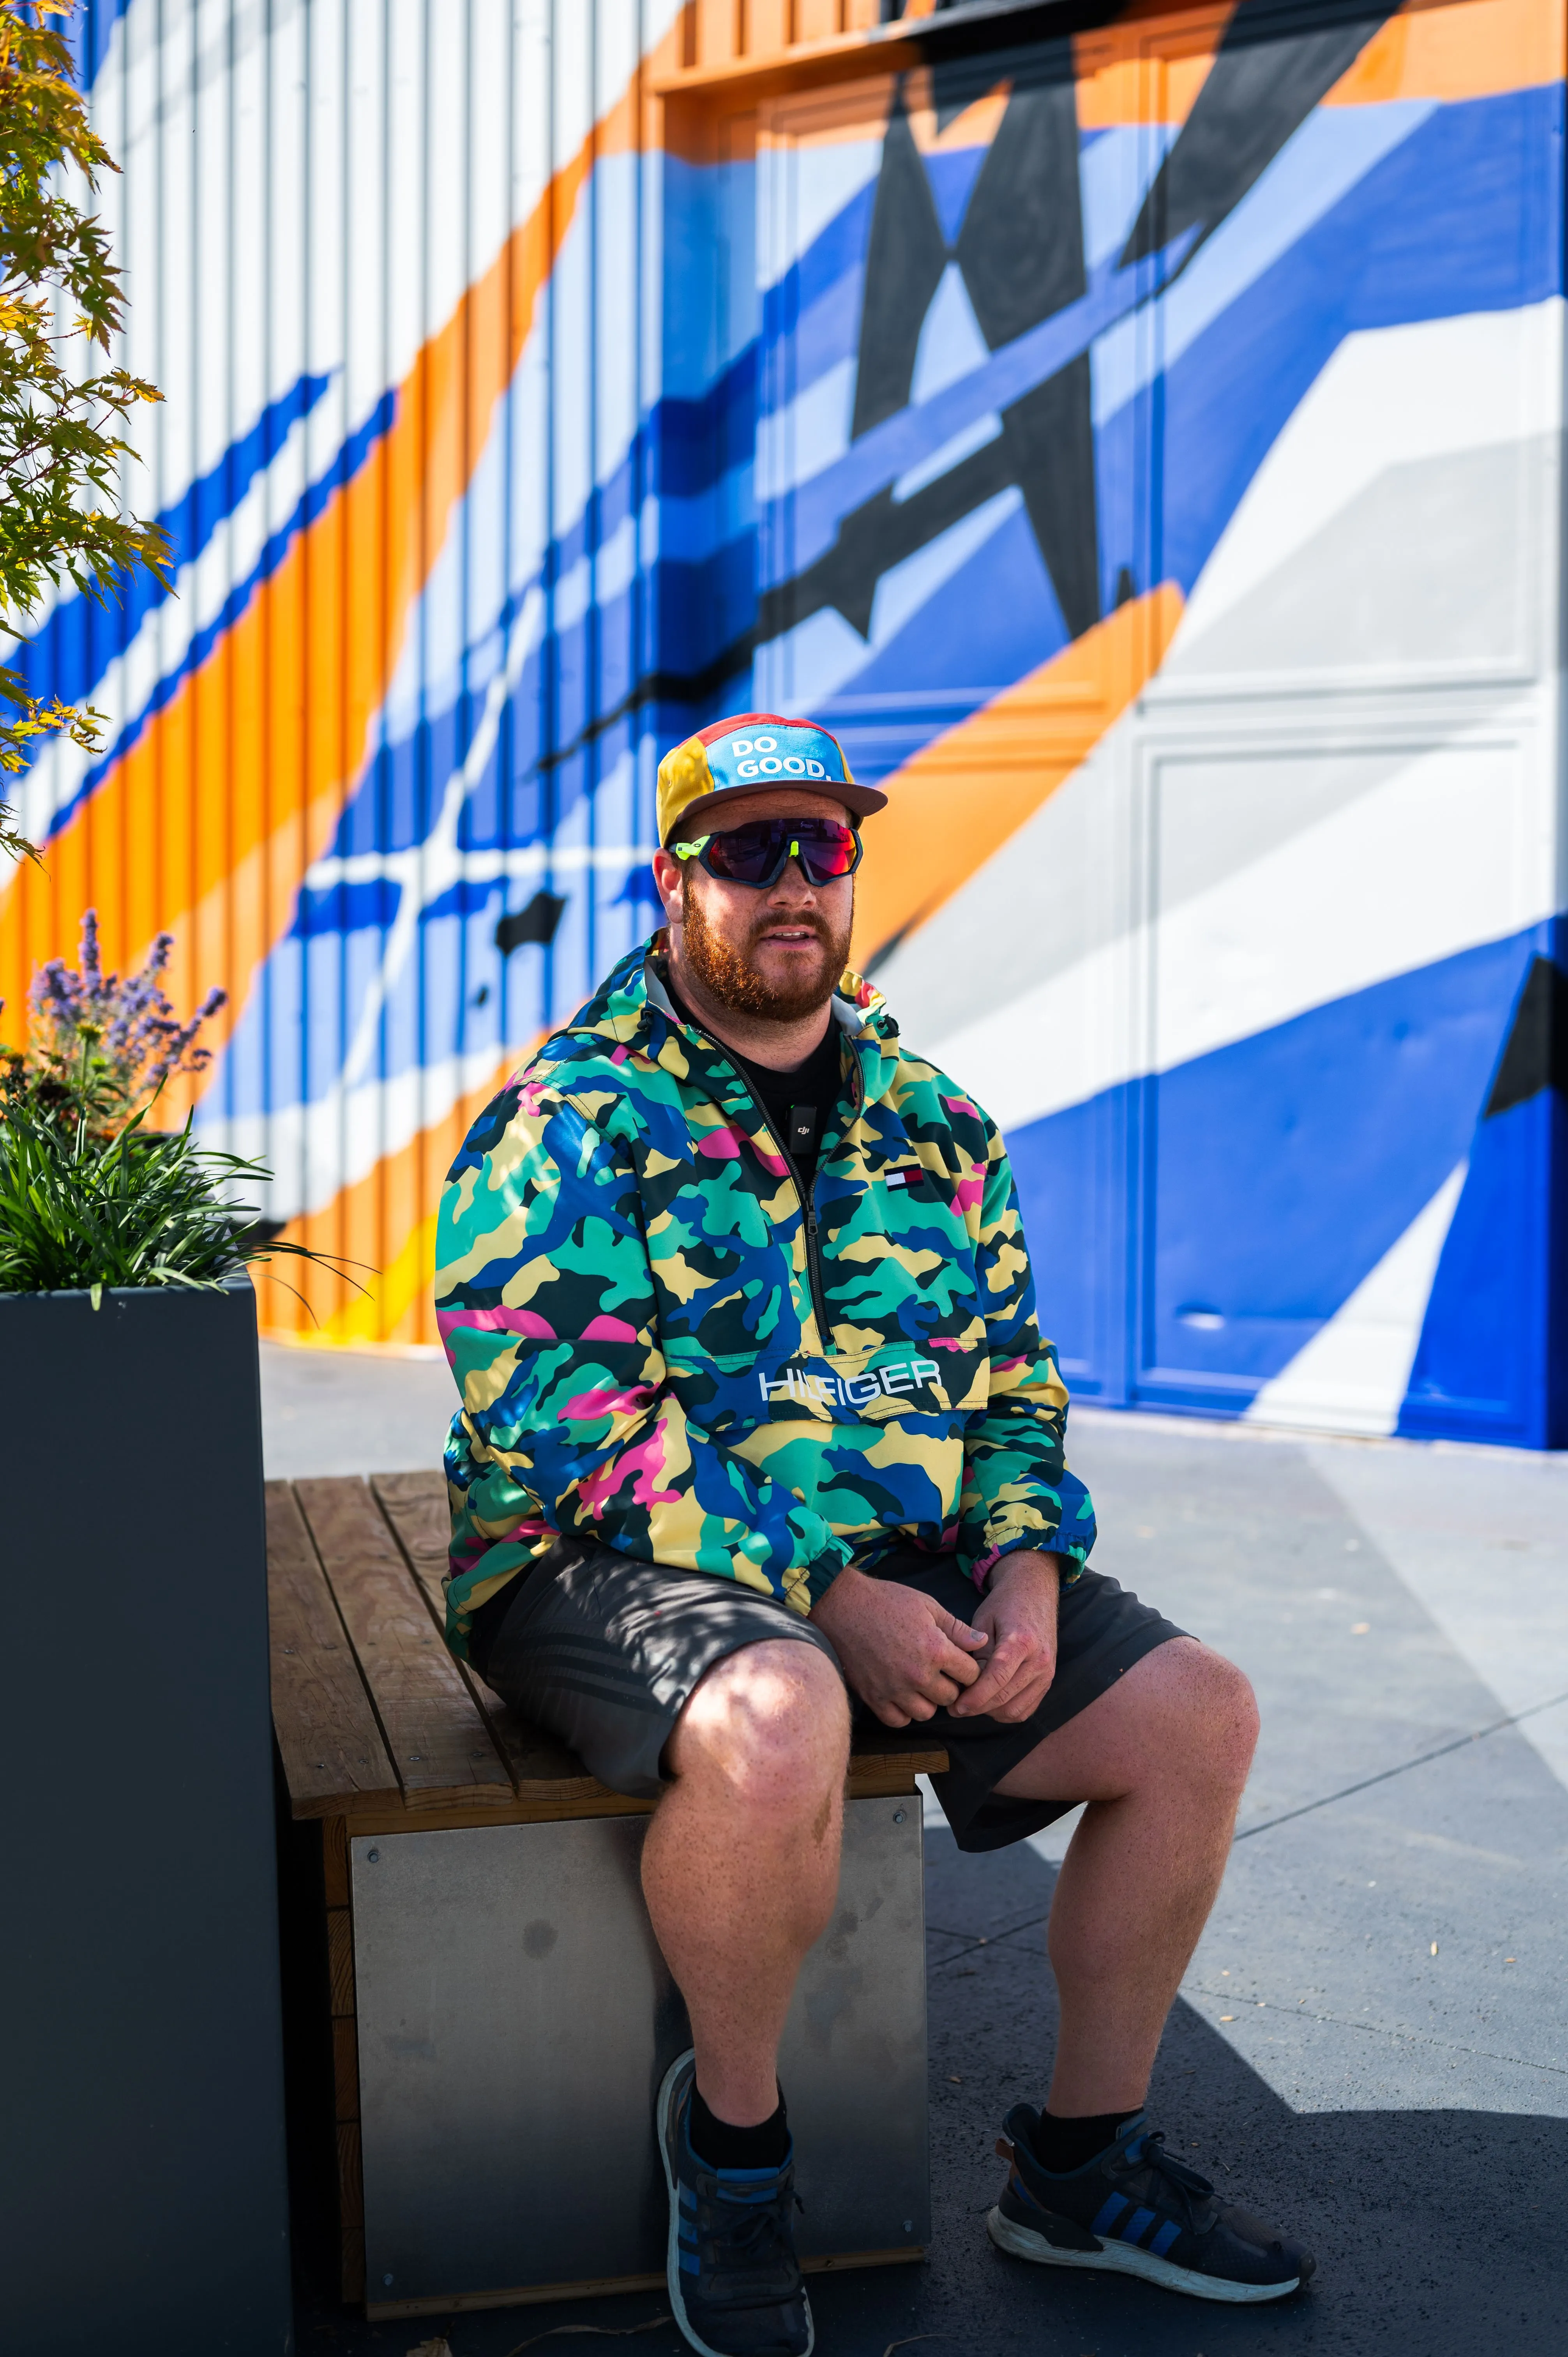 Man sitting on a bench wearing a colorful camouflaged jacket, sunglasses, and a cap against a vibrant geometric mural background.